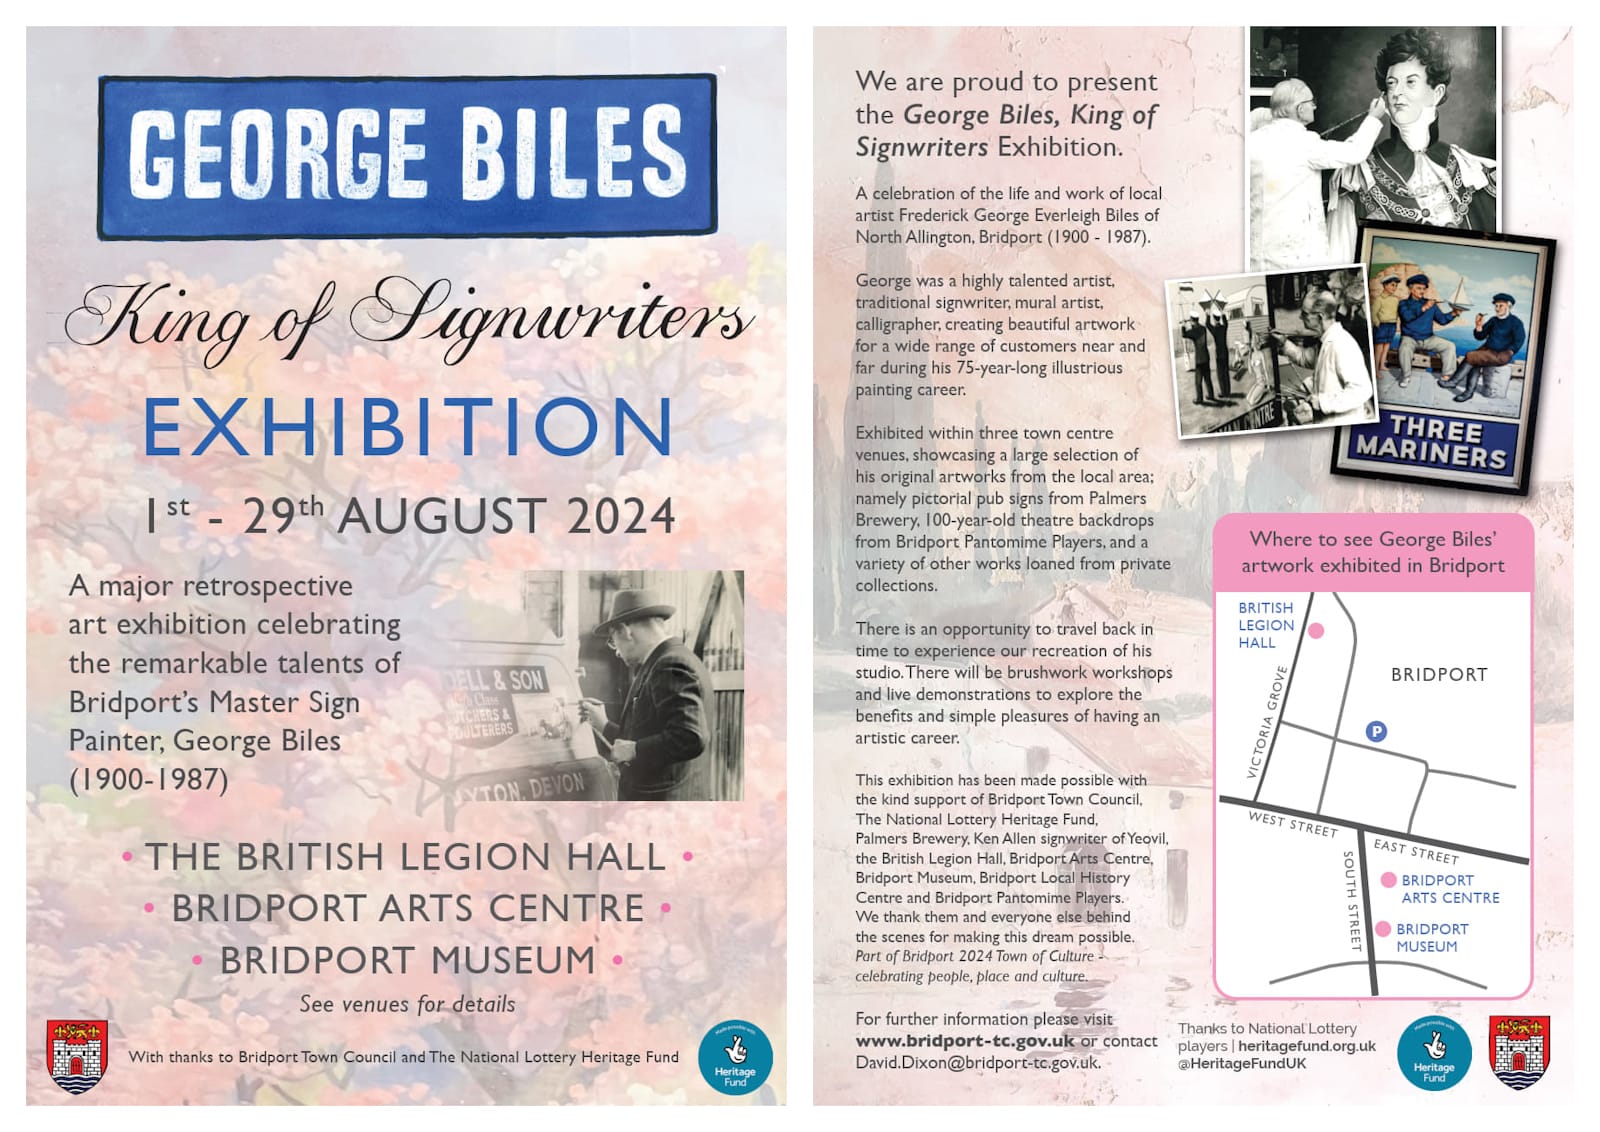 Front and back of a flyer being used to promote the exhibition "George Biles: King of Signwriters".